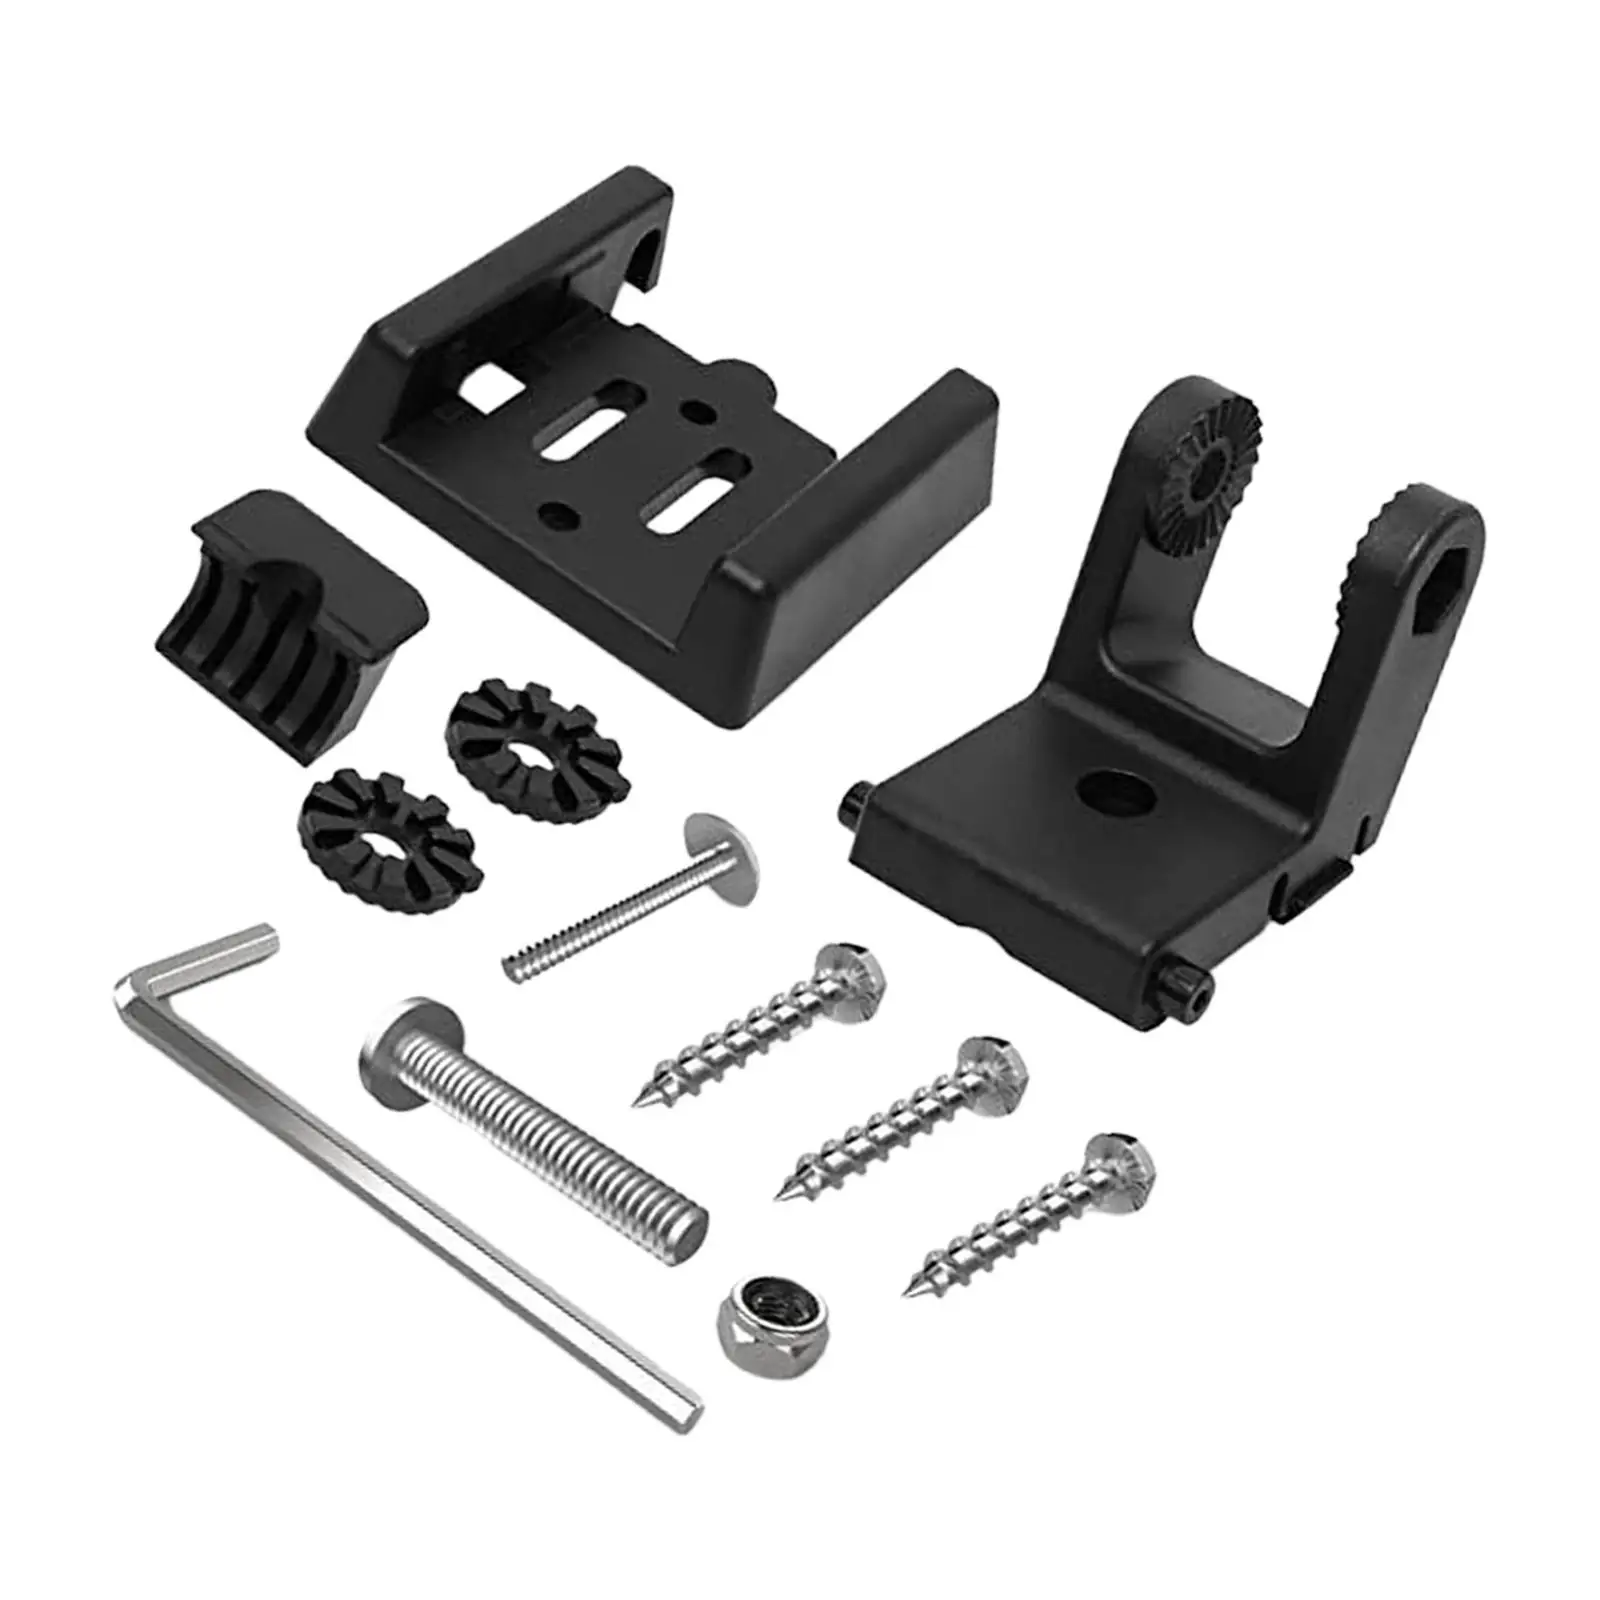 Transducer Bracket Replacement Transom Mounting Hardware Set Transducer Mount for XNT 920T 9HW T 14Di T 1474T 928T Durable